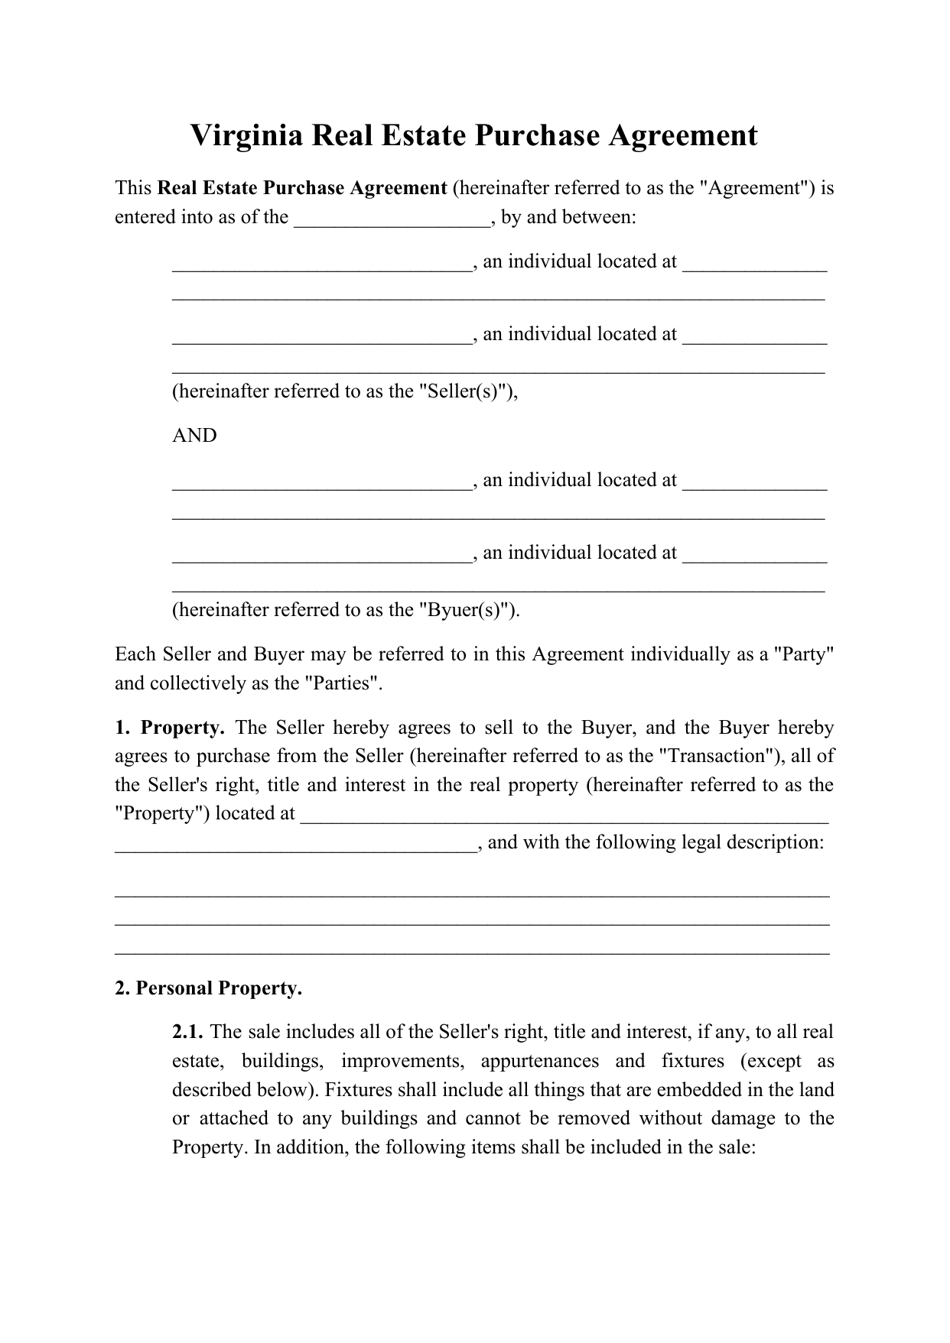 Real Estate Purchase Agreement Template - Virginia, Page 1